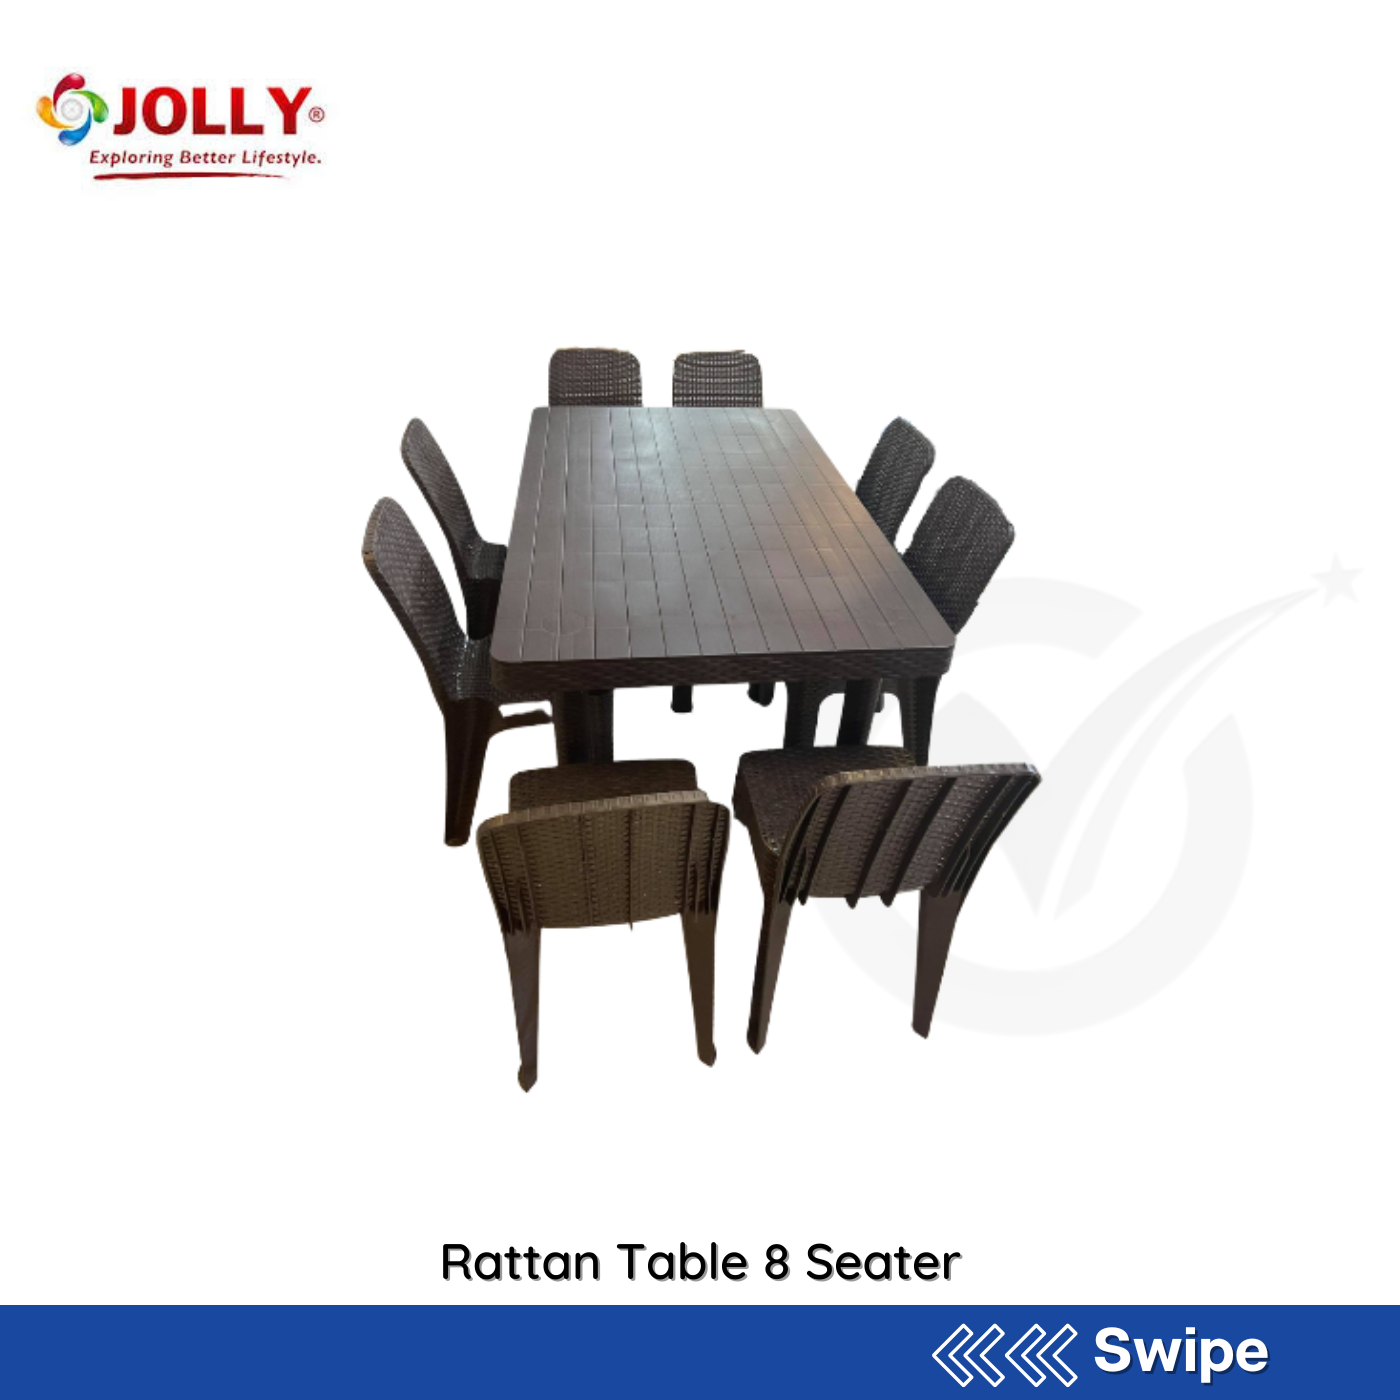 Rattan Table 8 Seater